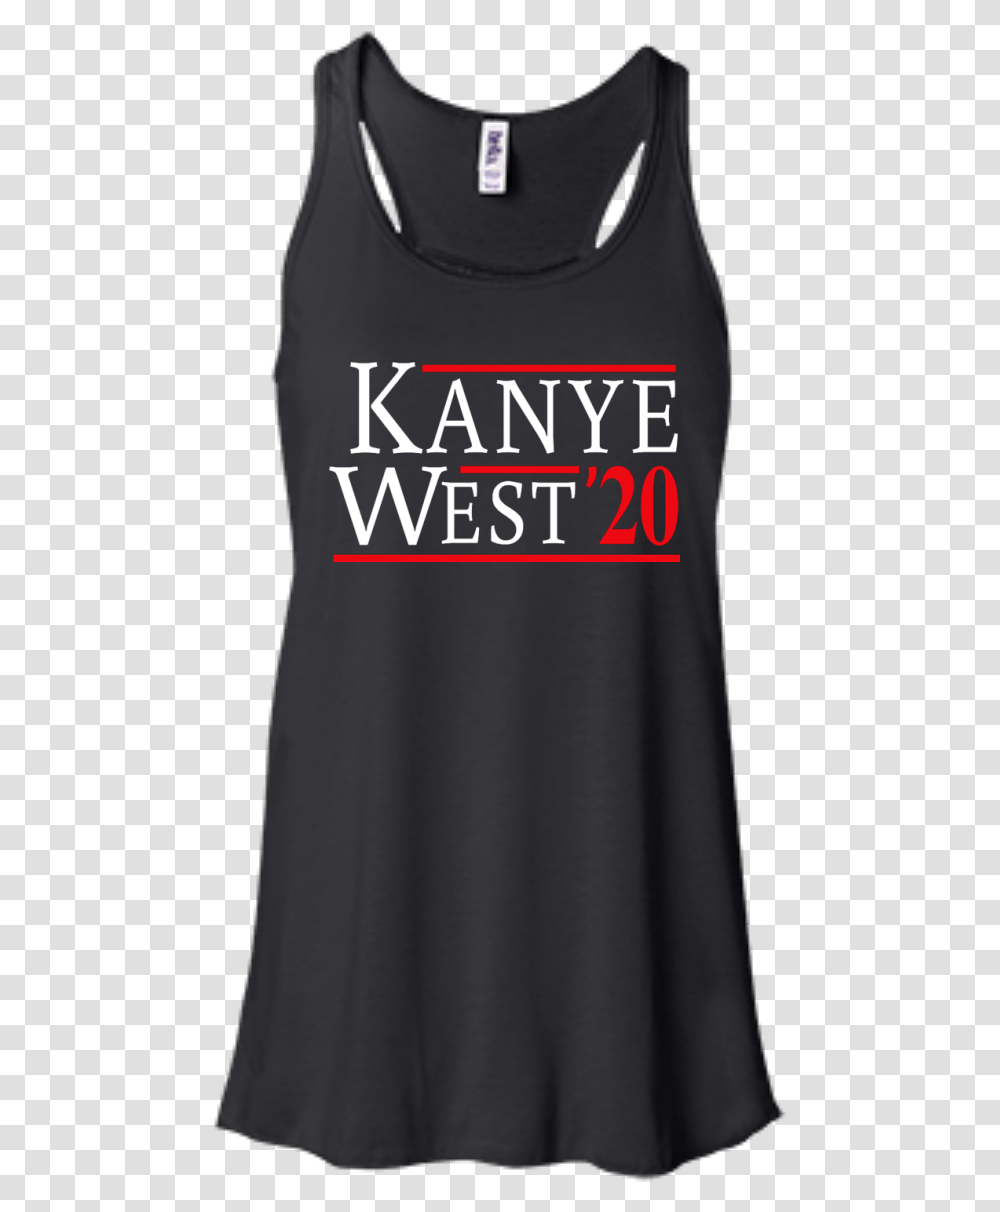 Kanye West For President 2016 T Shirt Amp Hoodies Tank, Sleeve, Long Sleeve, Tank Top Transparent Png